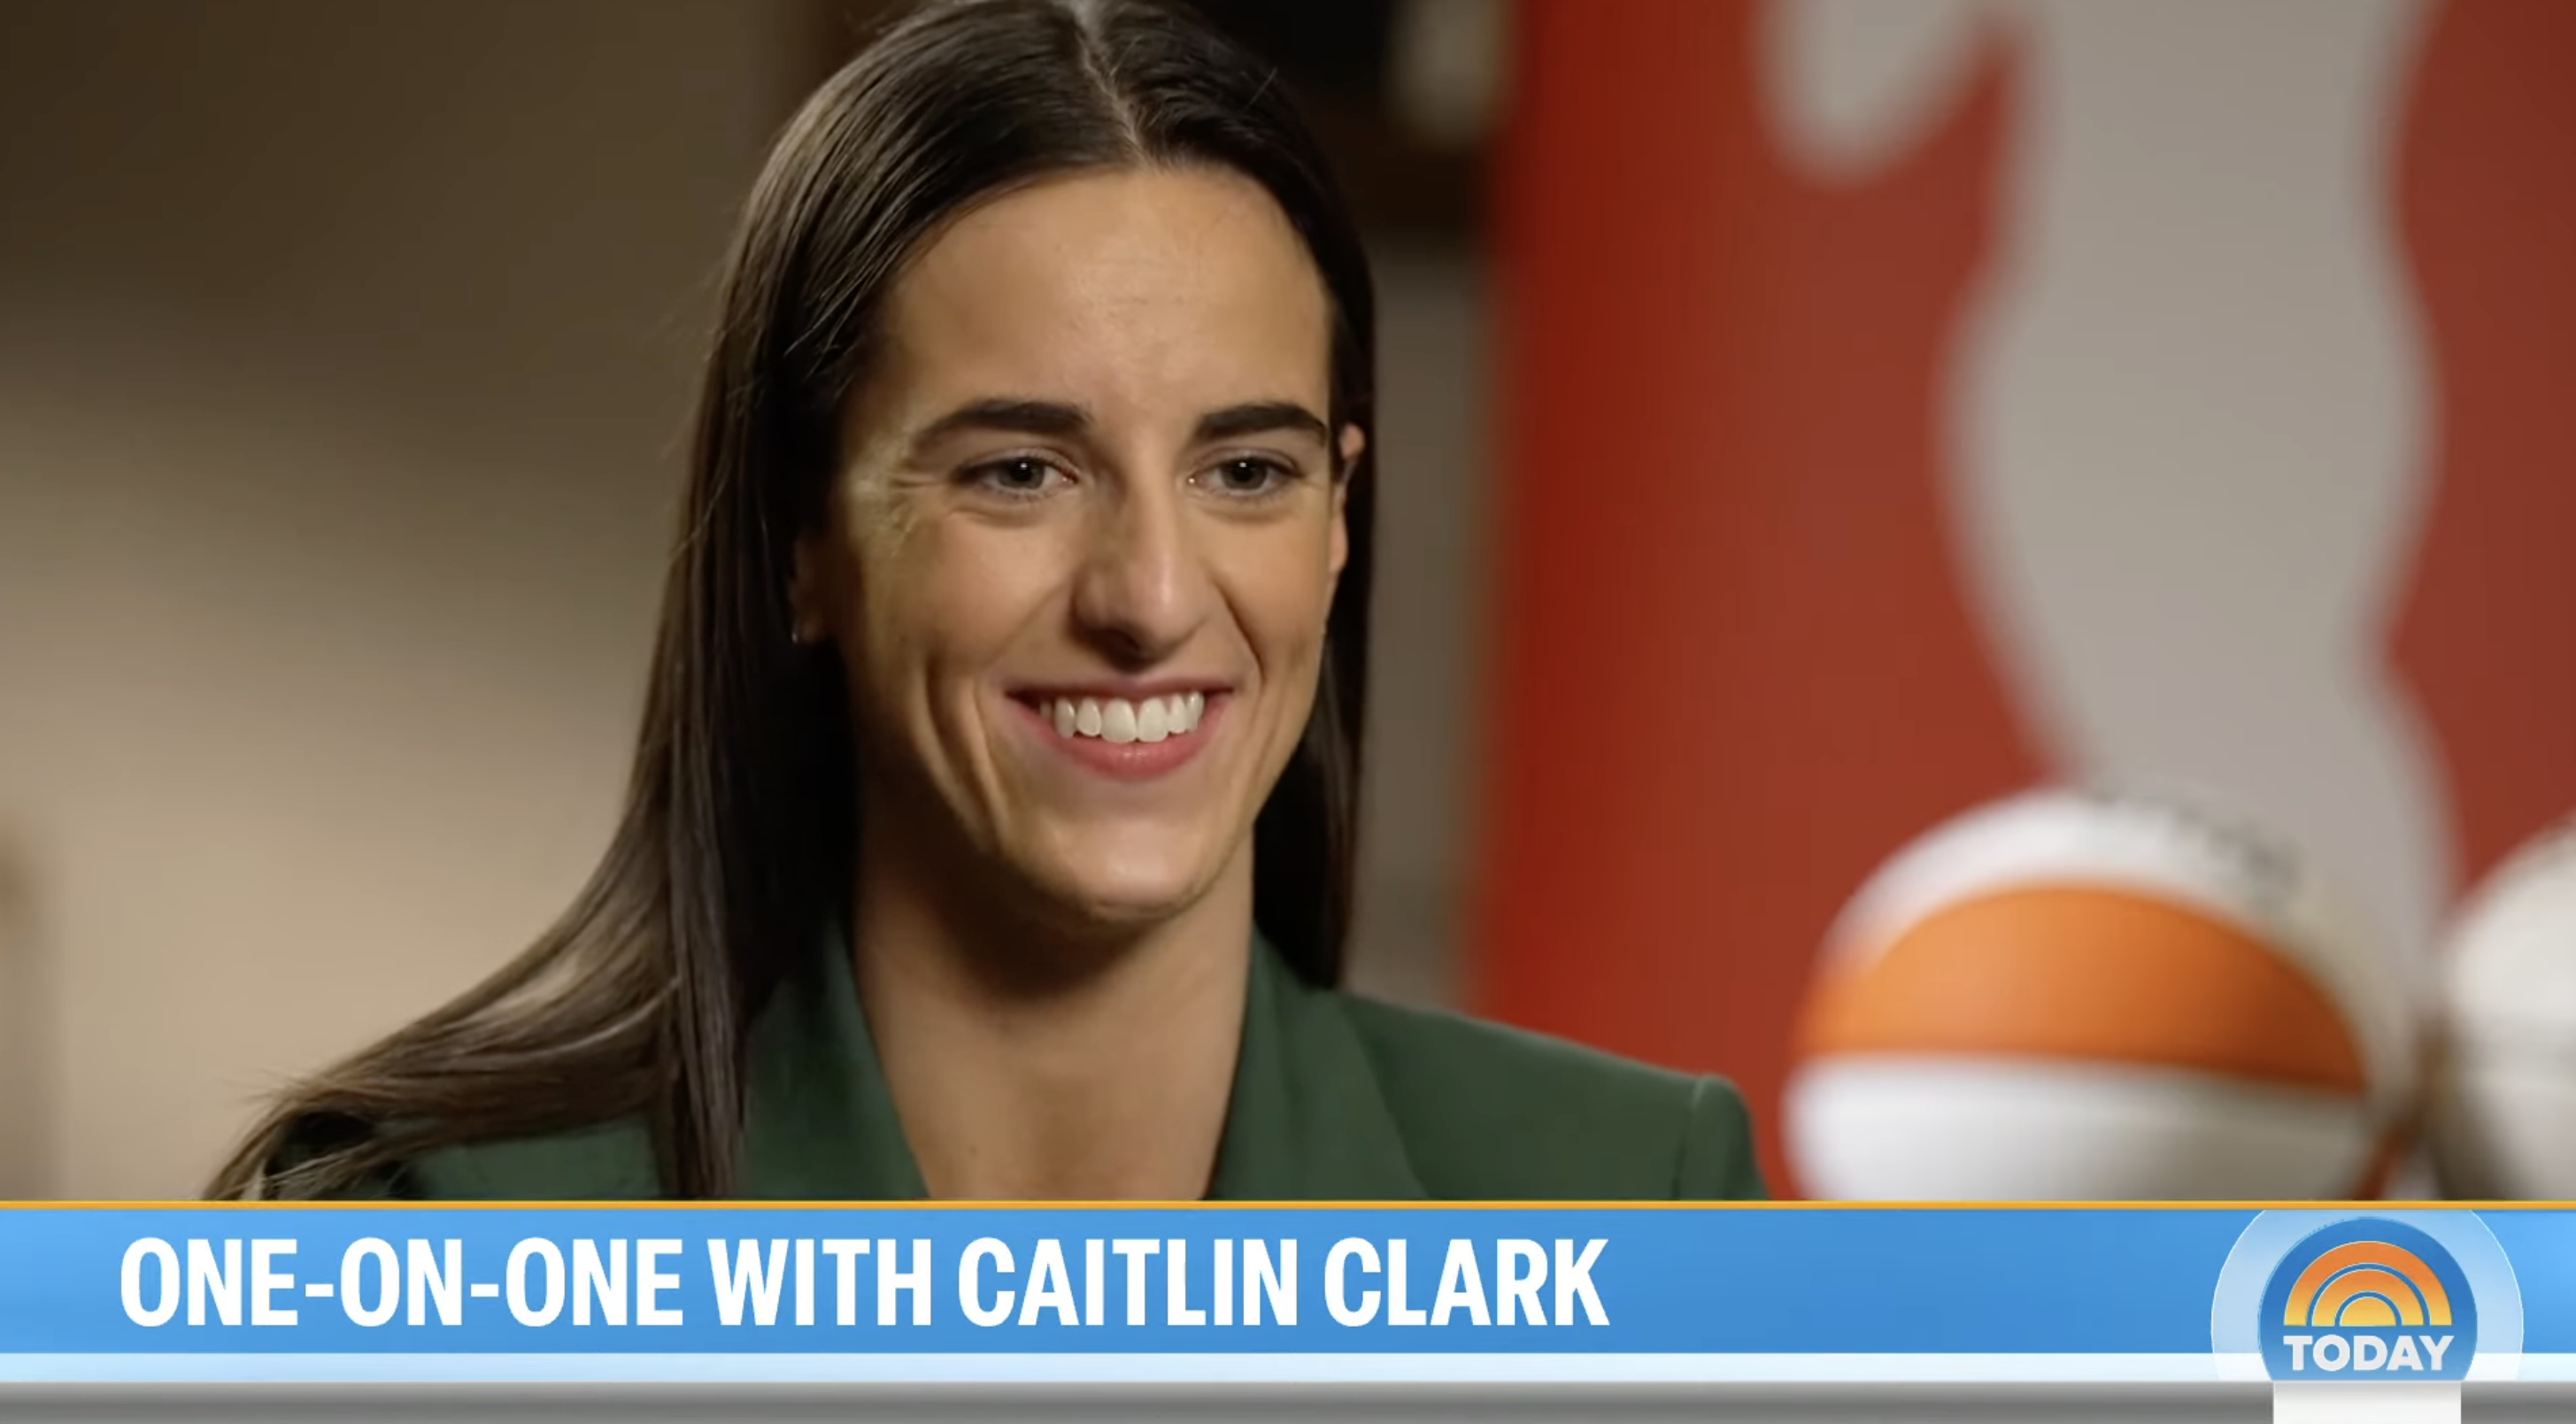 Caitlin Clark in an interview, smiling, wearing a green blazer with basketballs in background, text &quot;ONE-ON-ONE WITH CAITLIN CLARK&quot; below